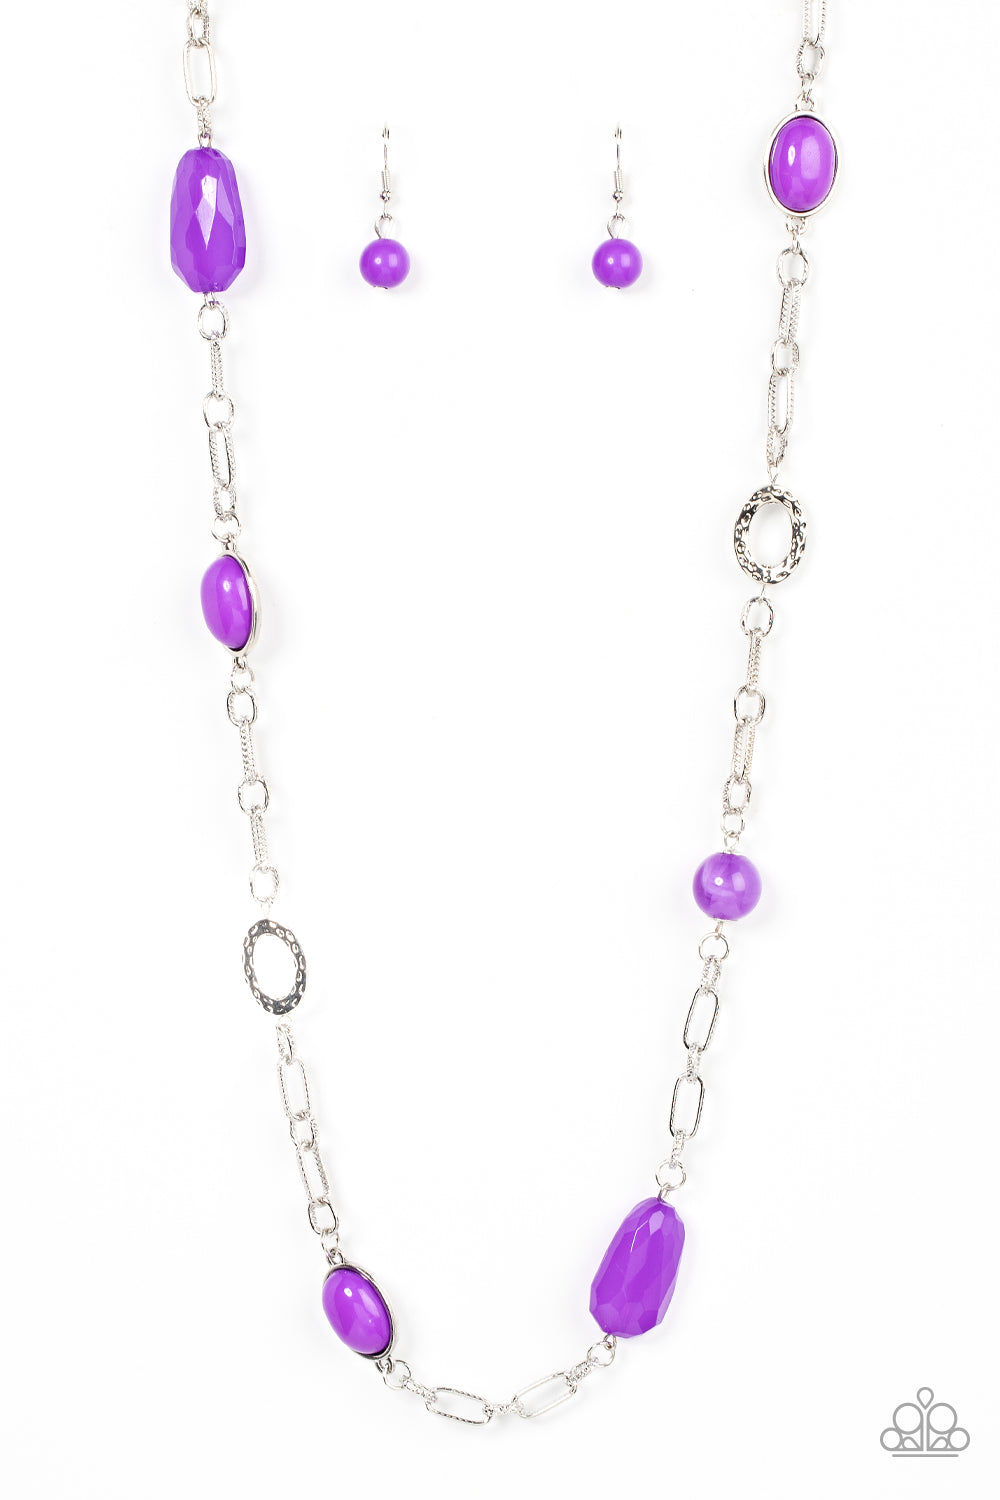 Barcelona Bash Paparazzi Accessories Necklace with Earrings Purple